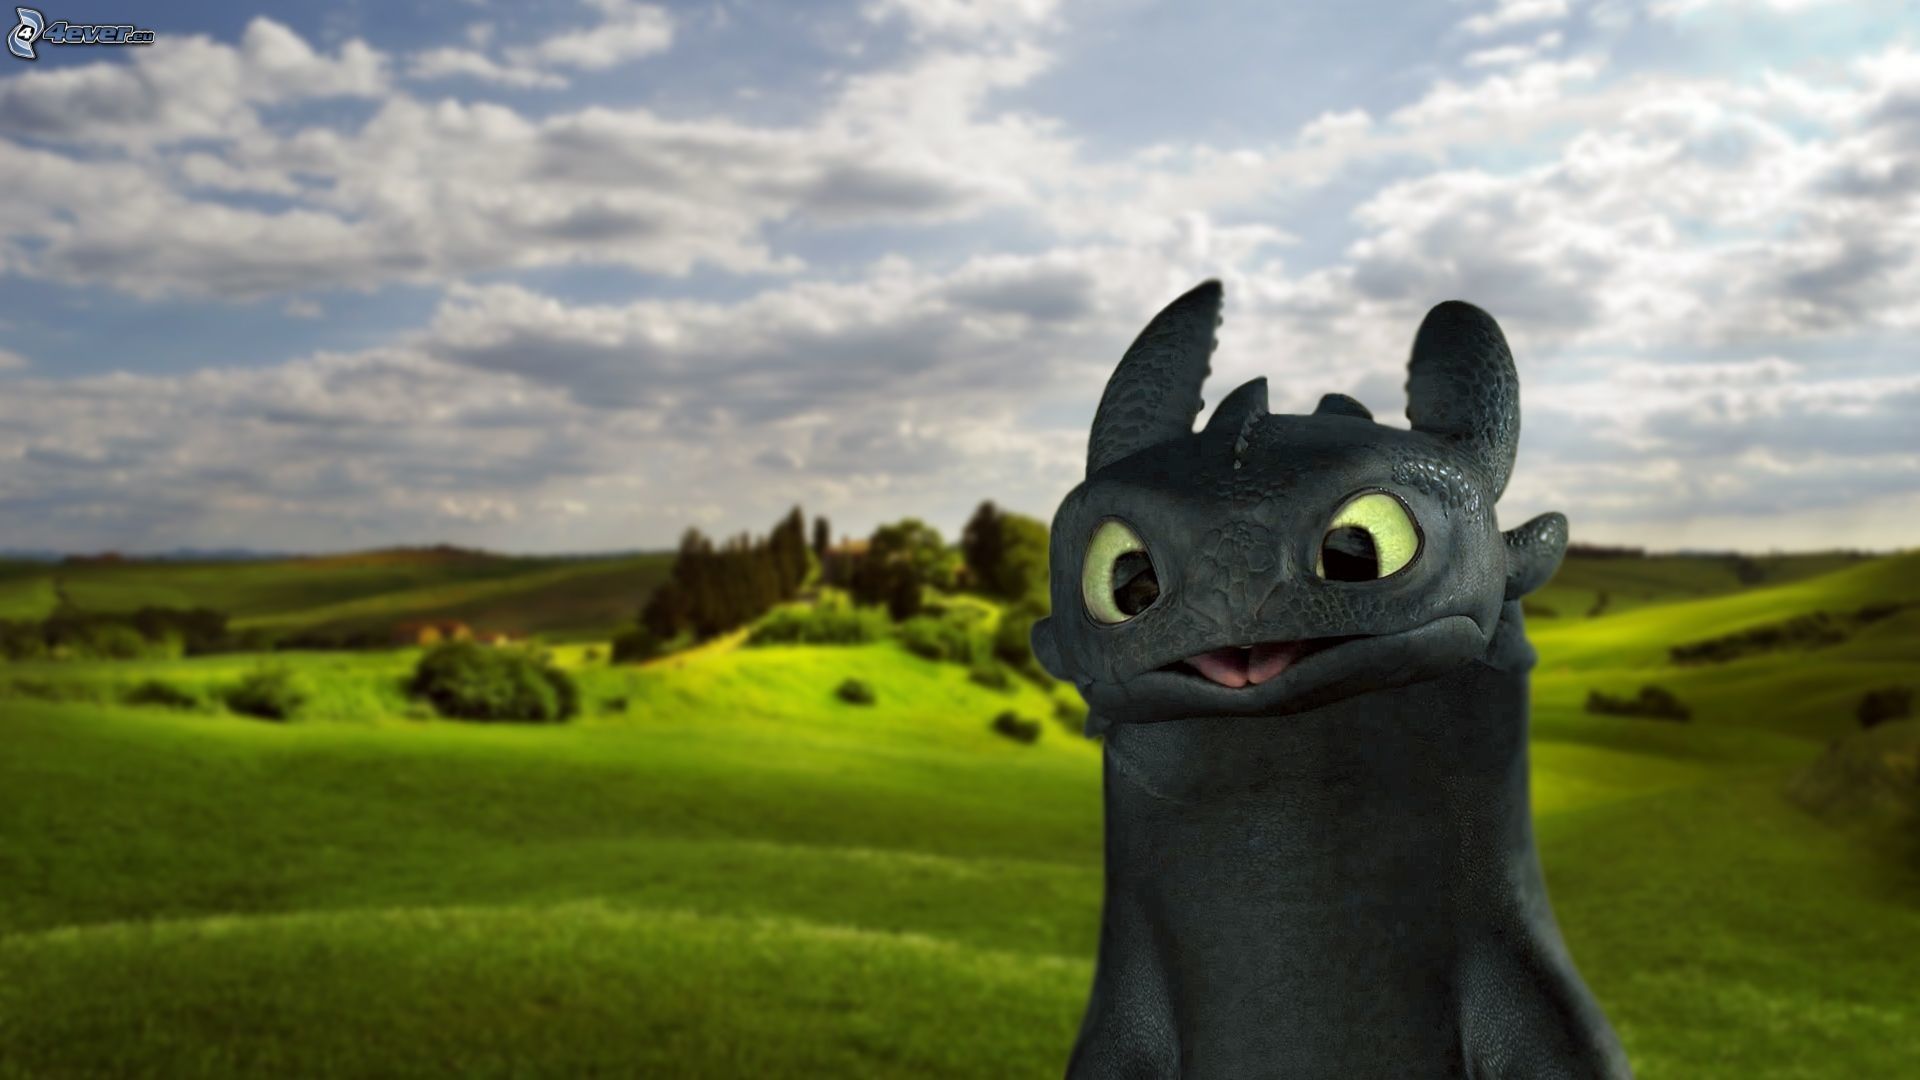 Toothless Dragon Wallpaper Cute